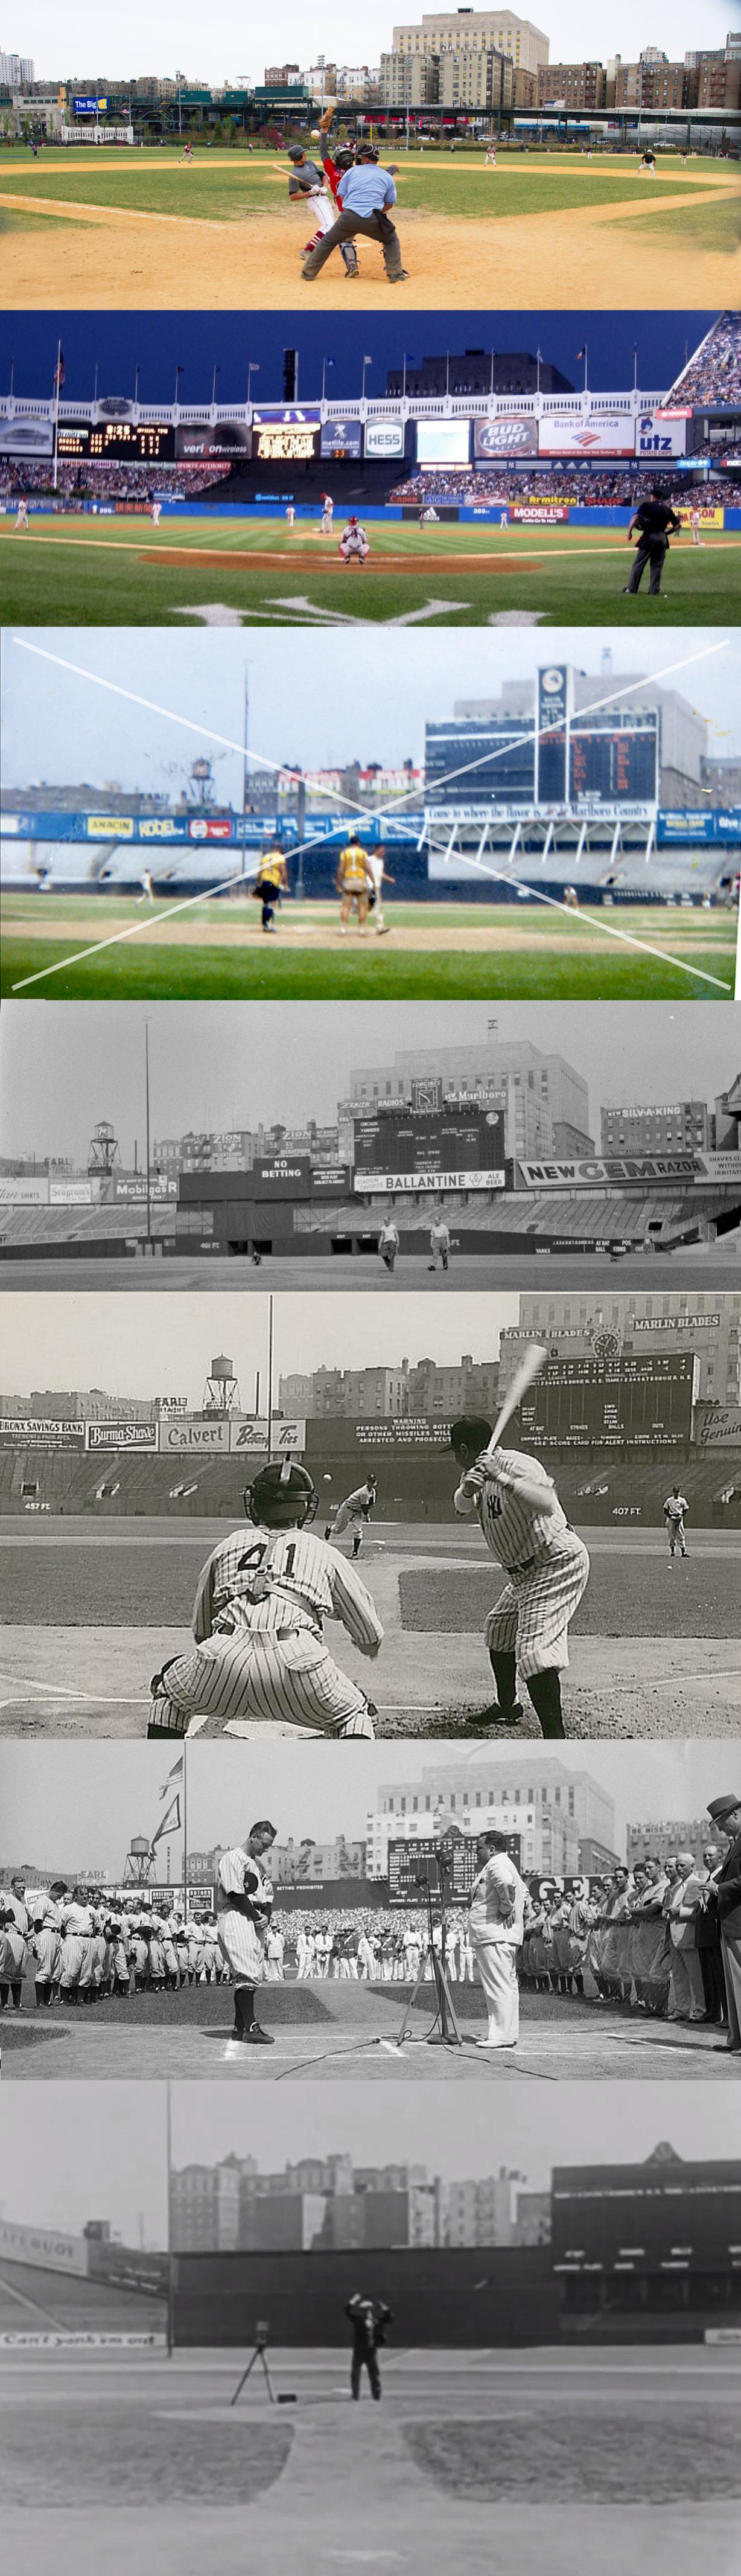 A view from old Yankee Stadium's home plate over the years - River Avenue  Blues